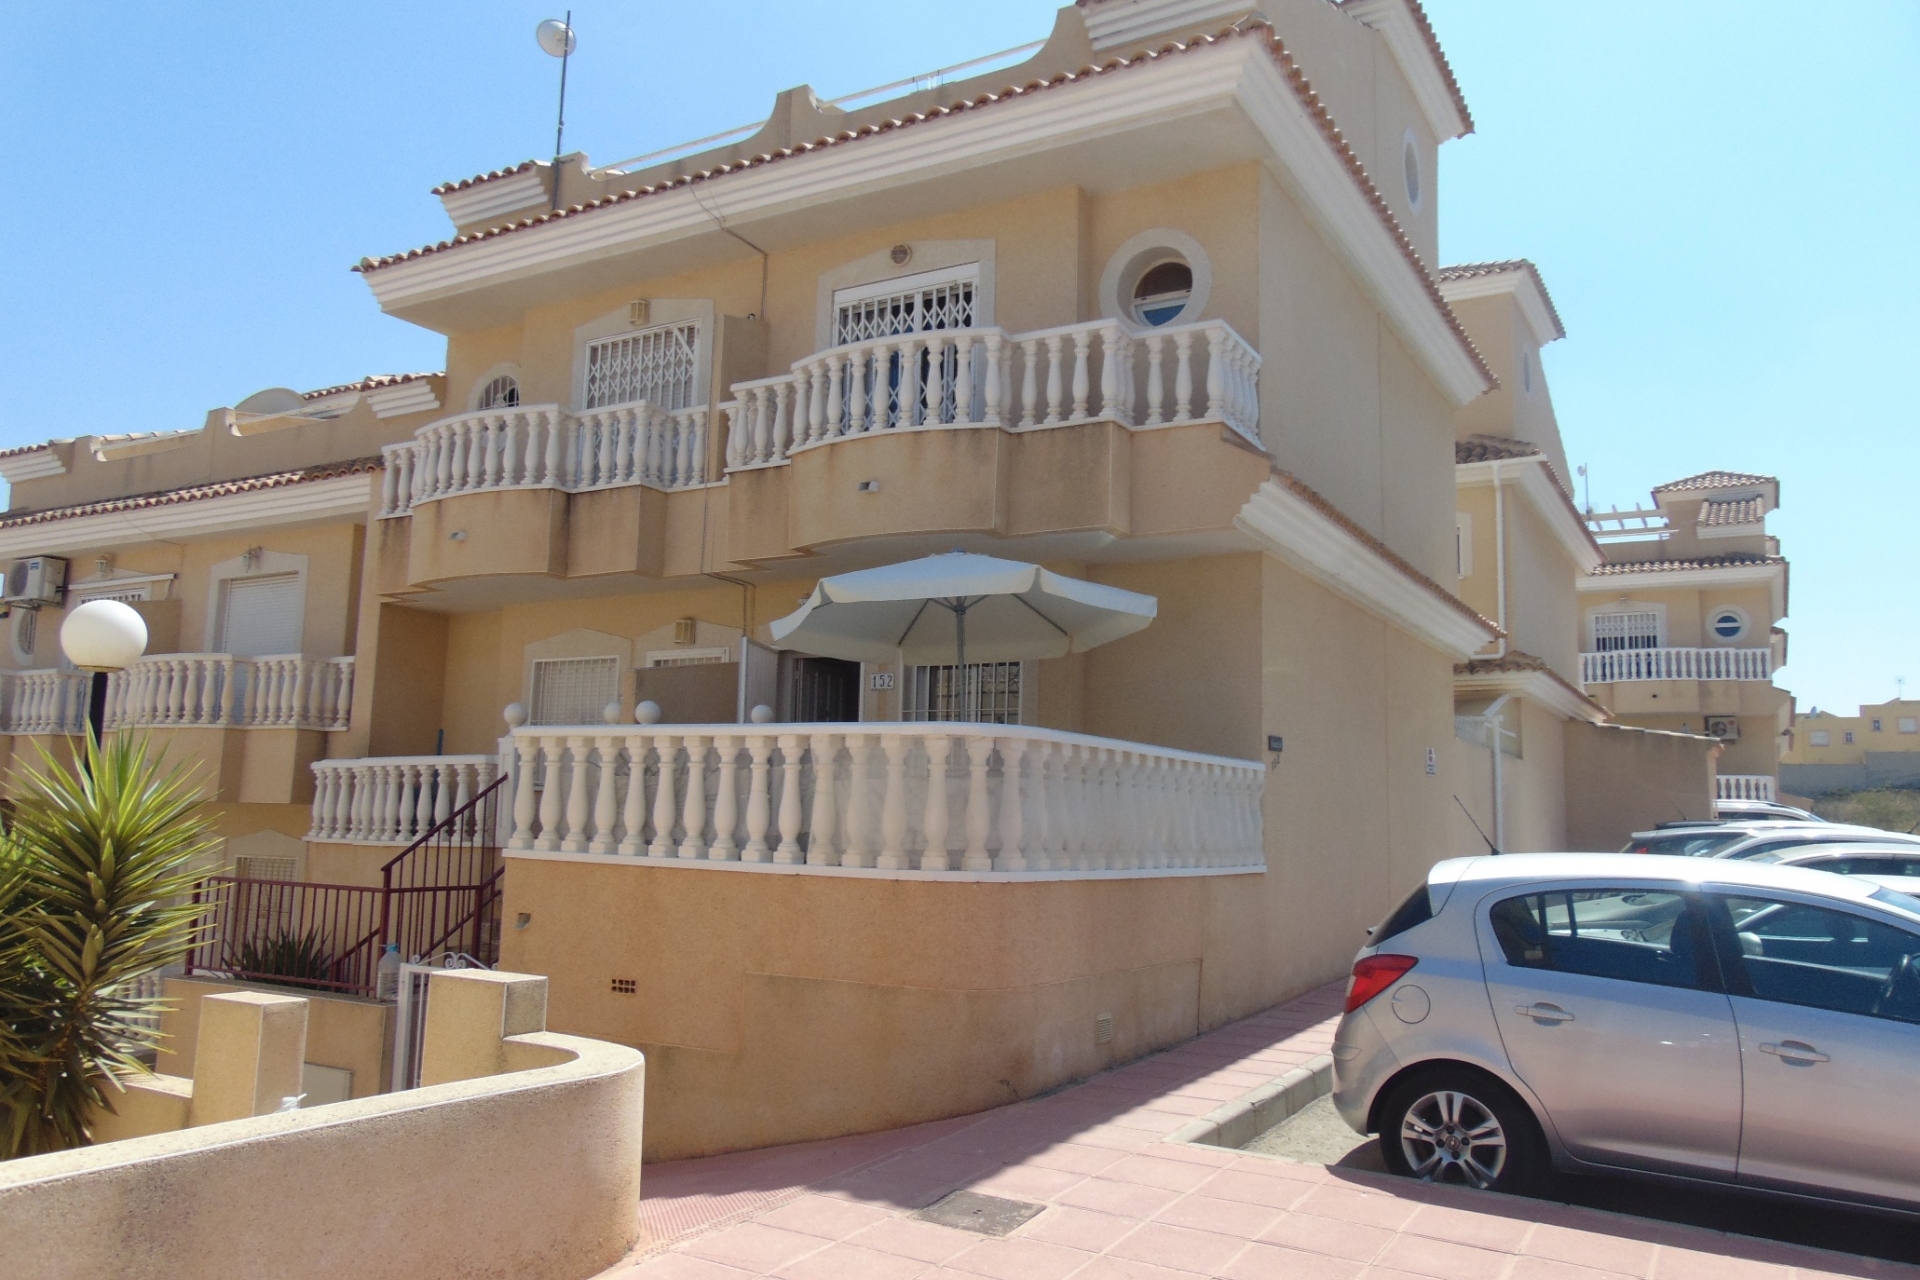 Property Sold - Townhouse for sale - Orihuela Costa - Las Filipinas